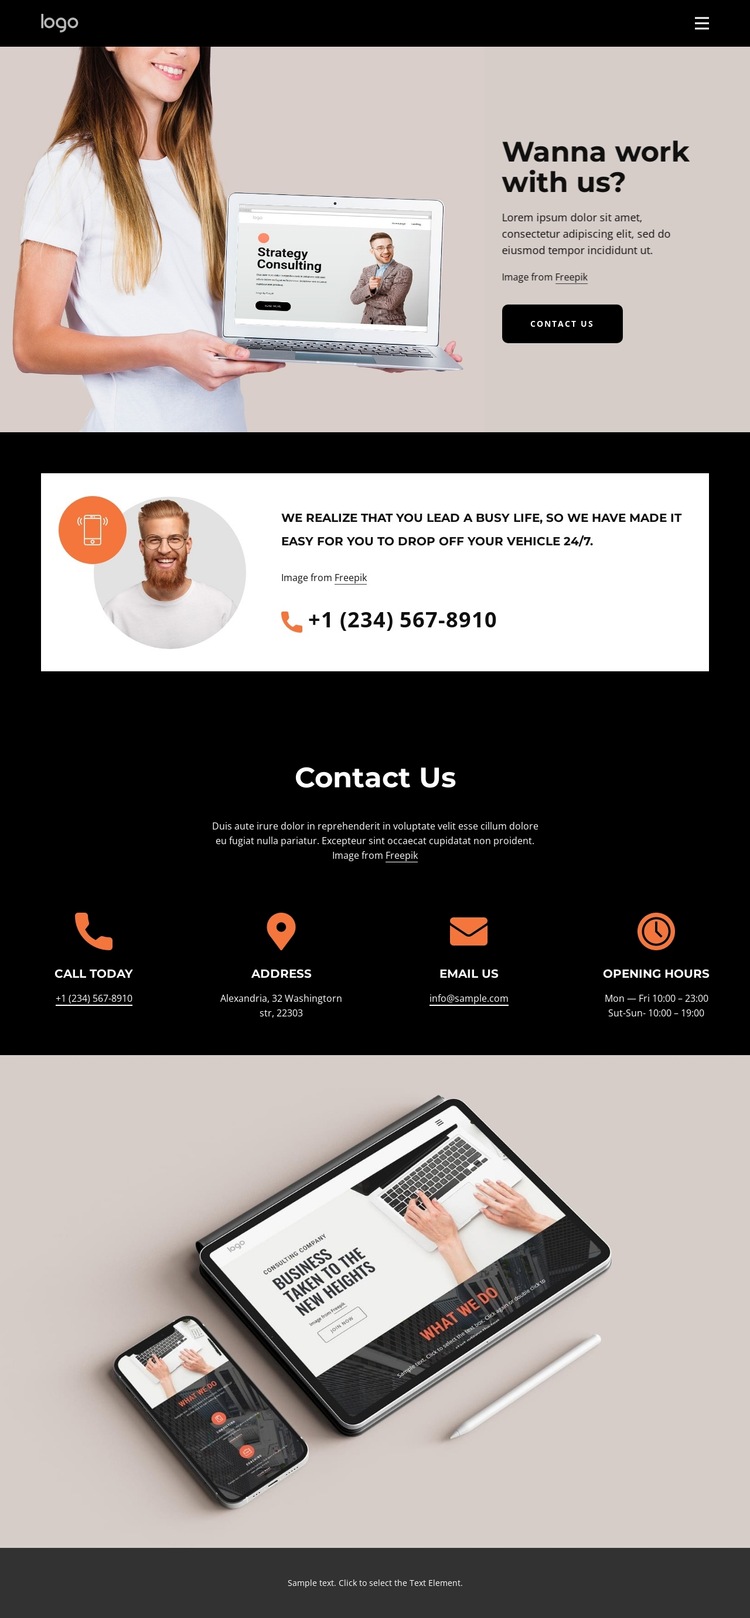 It started with honesty, passion and innovation HTML5 Template